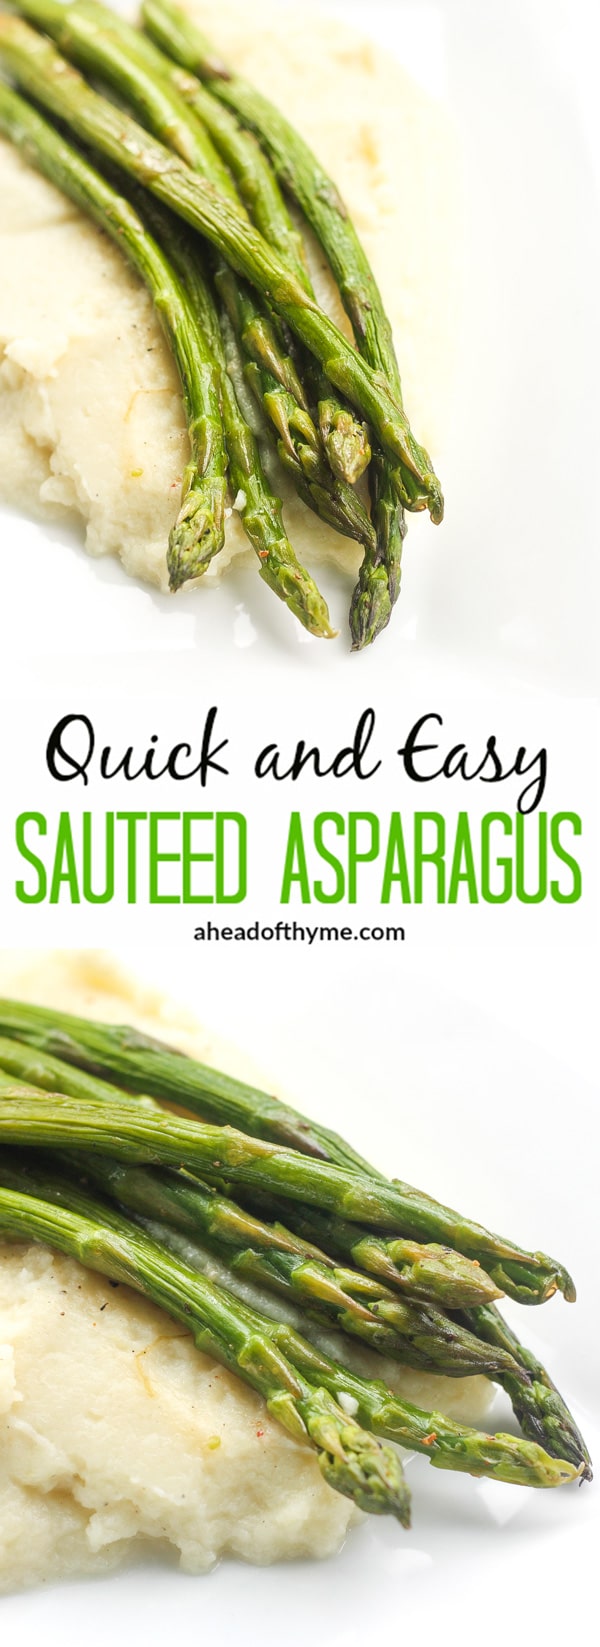 Quick and Easy Sautéed Asparagus: Keep dinner healthy, yet full of flavour with a side of quick and easy sautéed asparagus: the perfect companion to your main dish | aheadofthyme.com